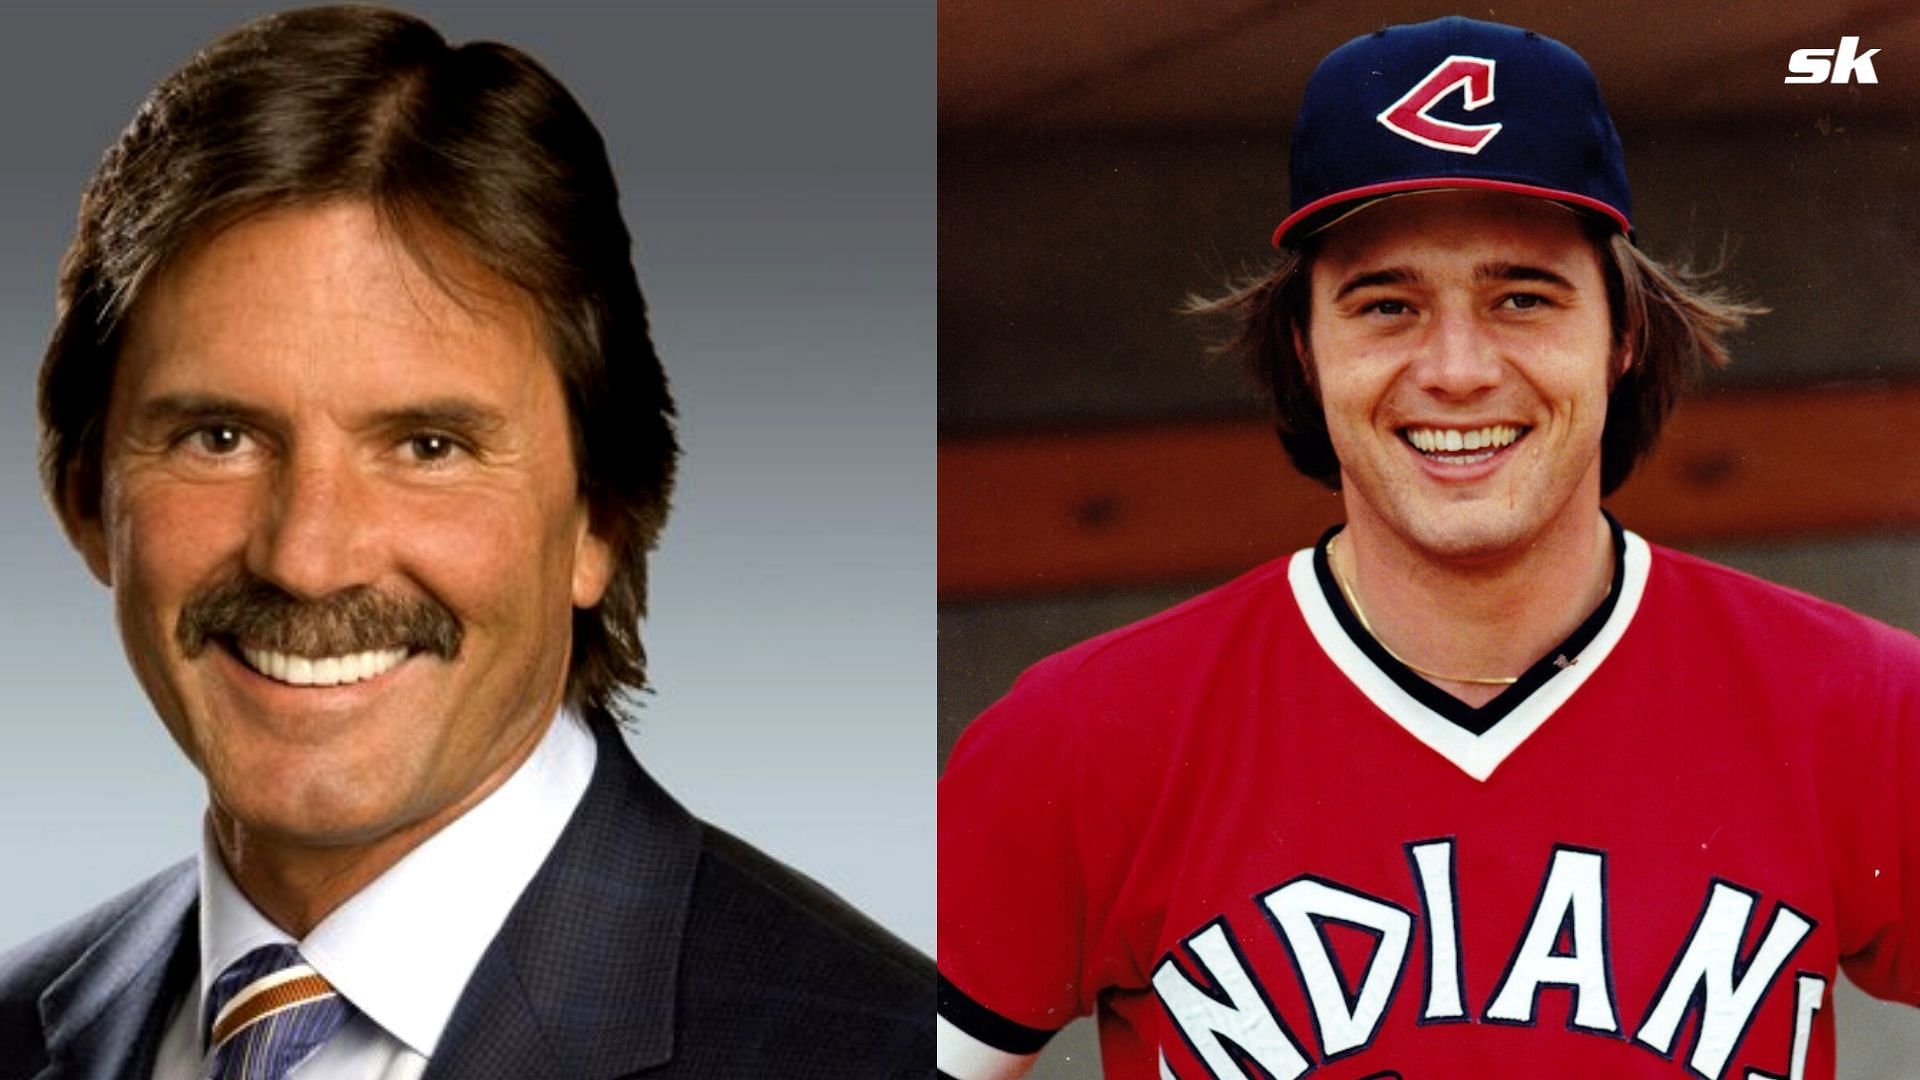 Dennis Eckersley in 2018: I had a real close friend who stole my